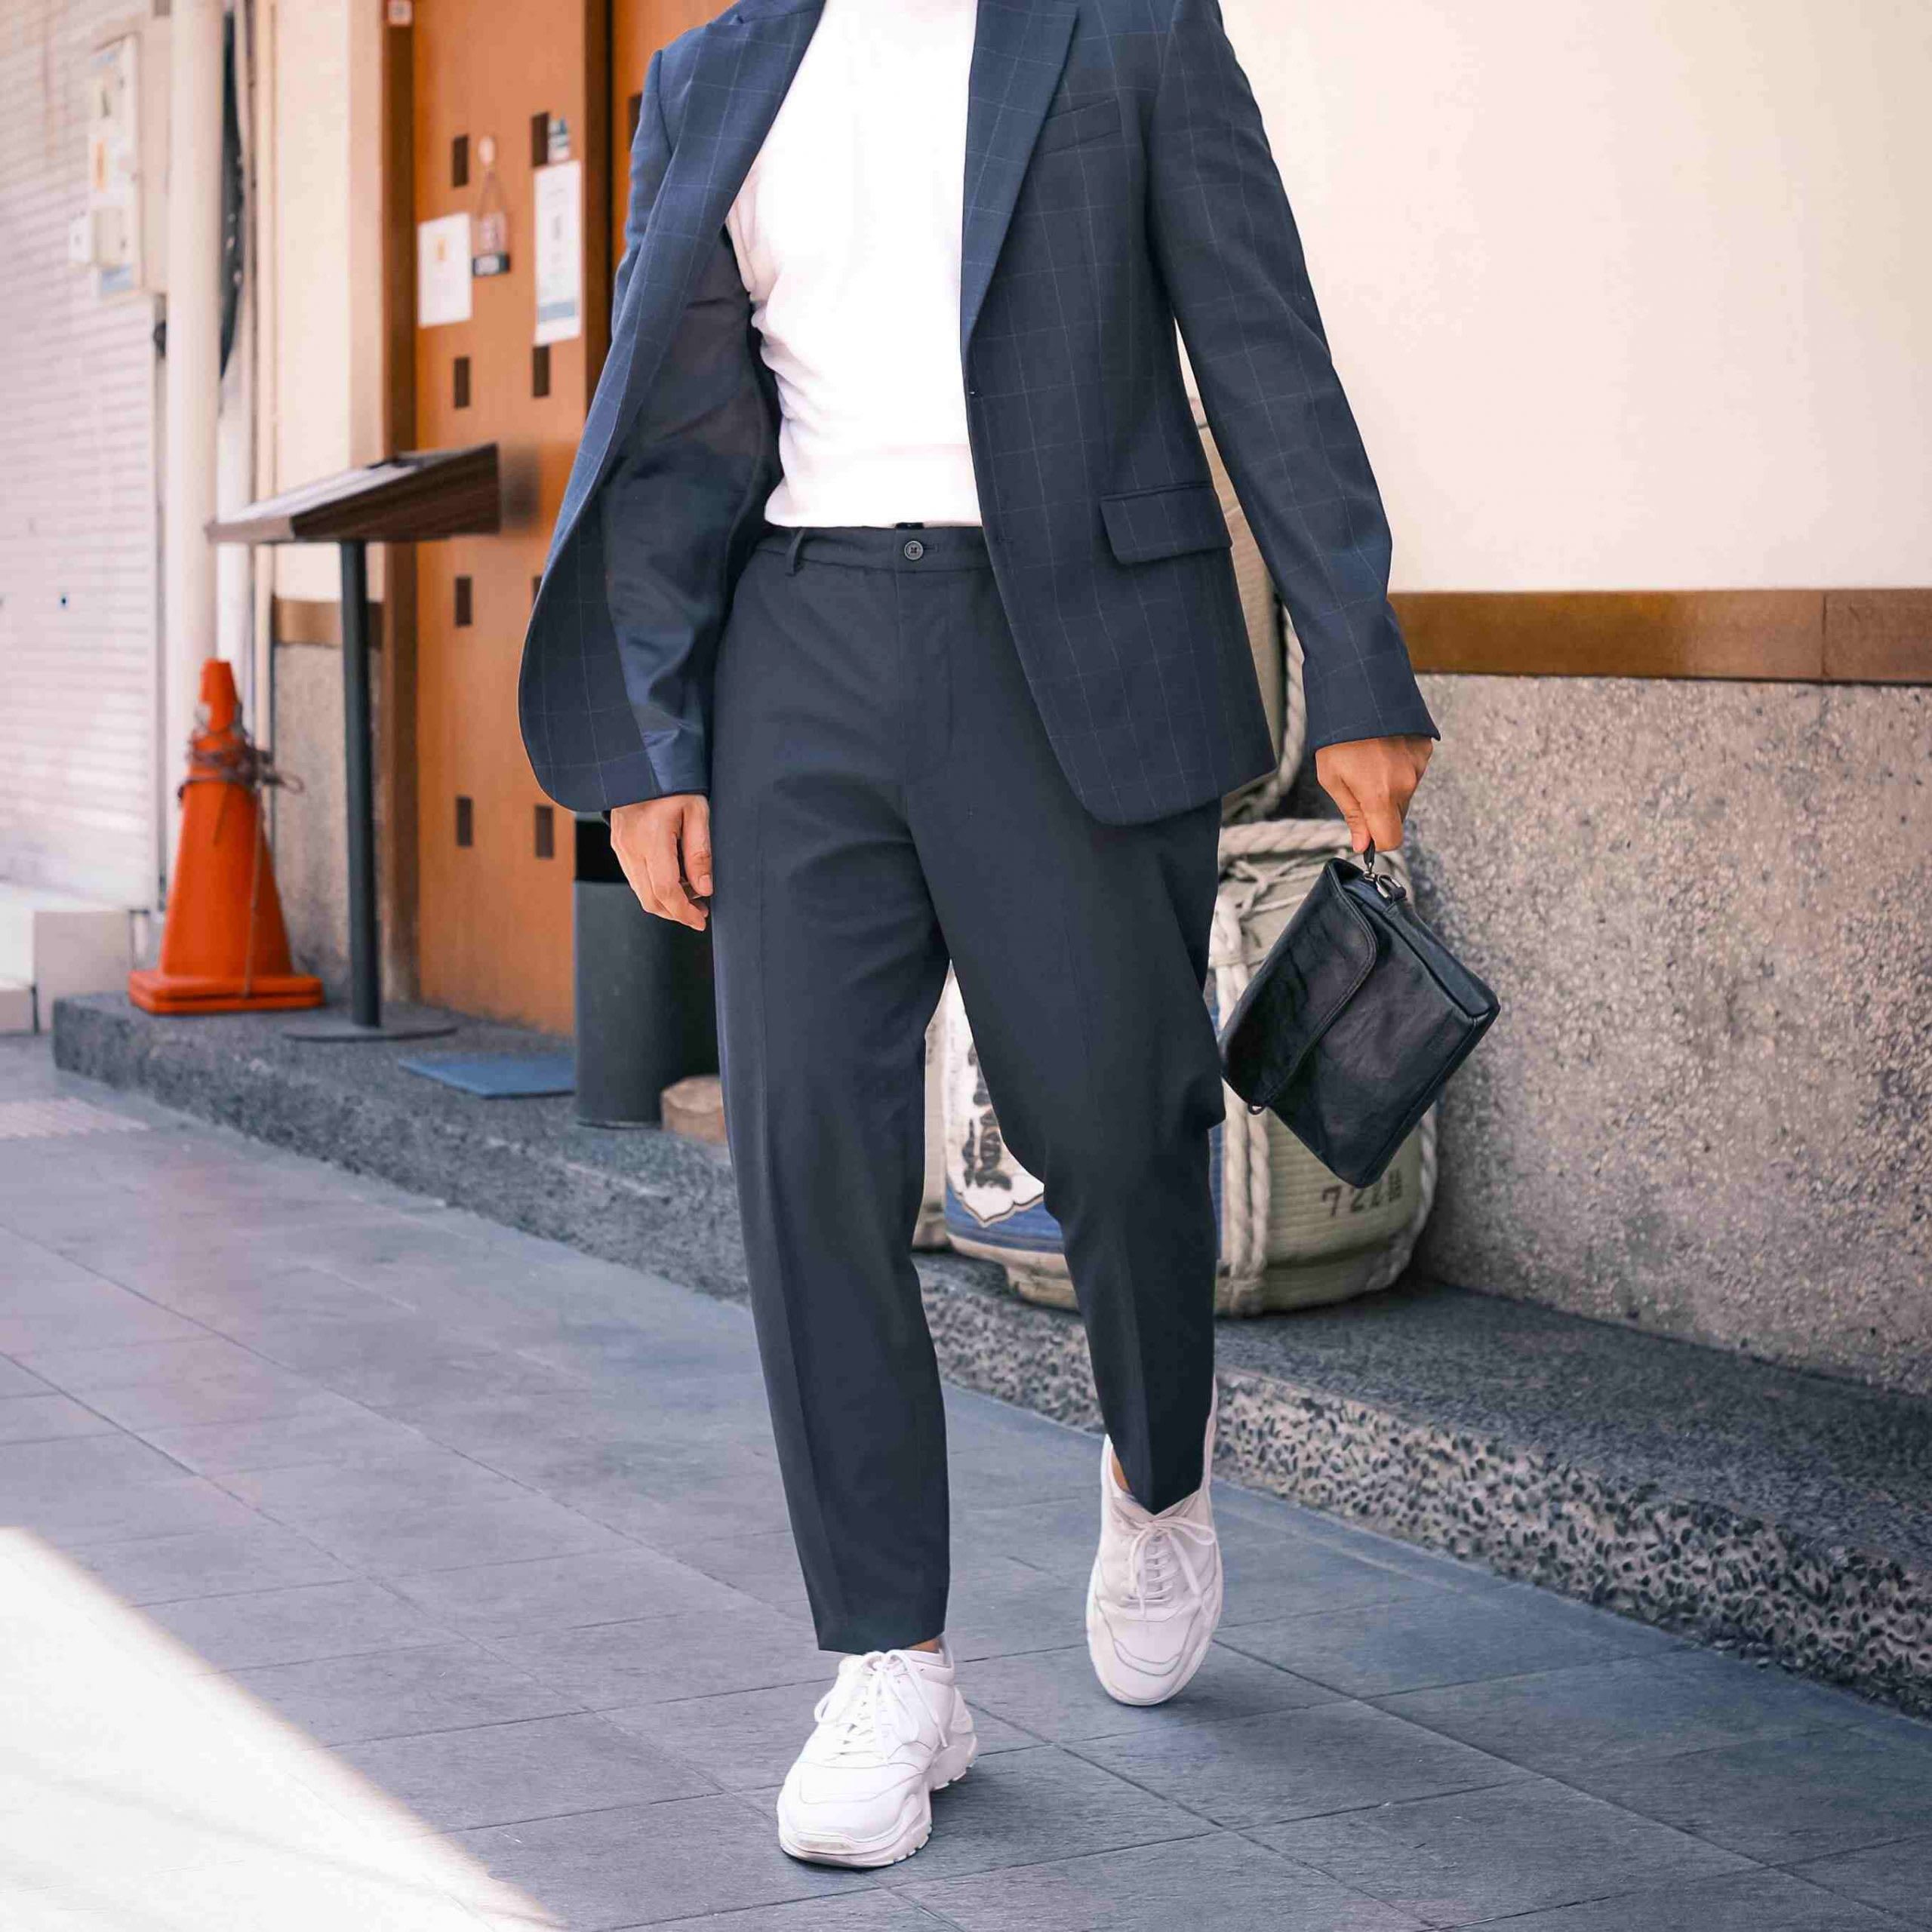 Can You Wear Trainers With a Suit? - Mainline Menswear Blog (UK)